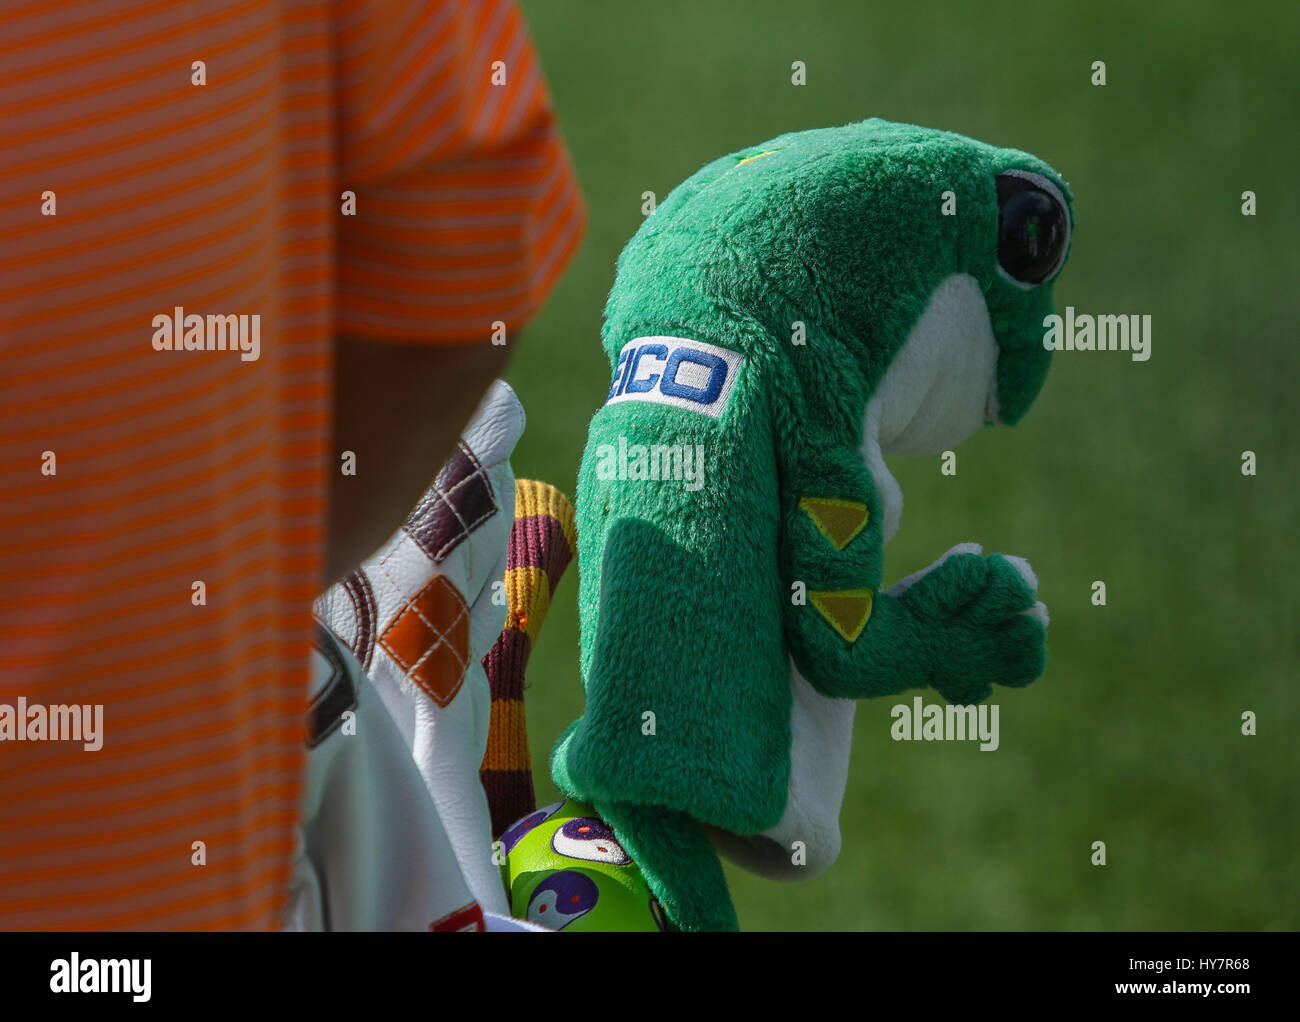 Humble, Texas, USA. 1st Apr, 2017. A Geico club head cover on a golf club during the third round of the Shell Houston Open at the Golf Club of Houston in Humble, Texas. John Glaser/CSM/Alamy Live News Stock Photo